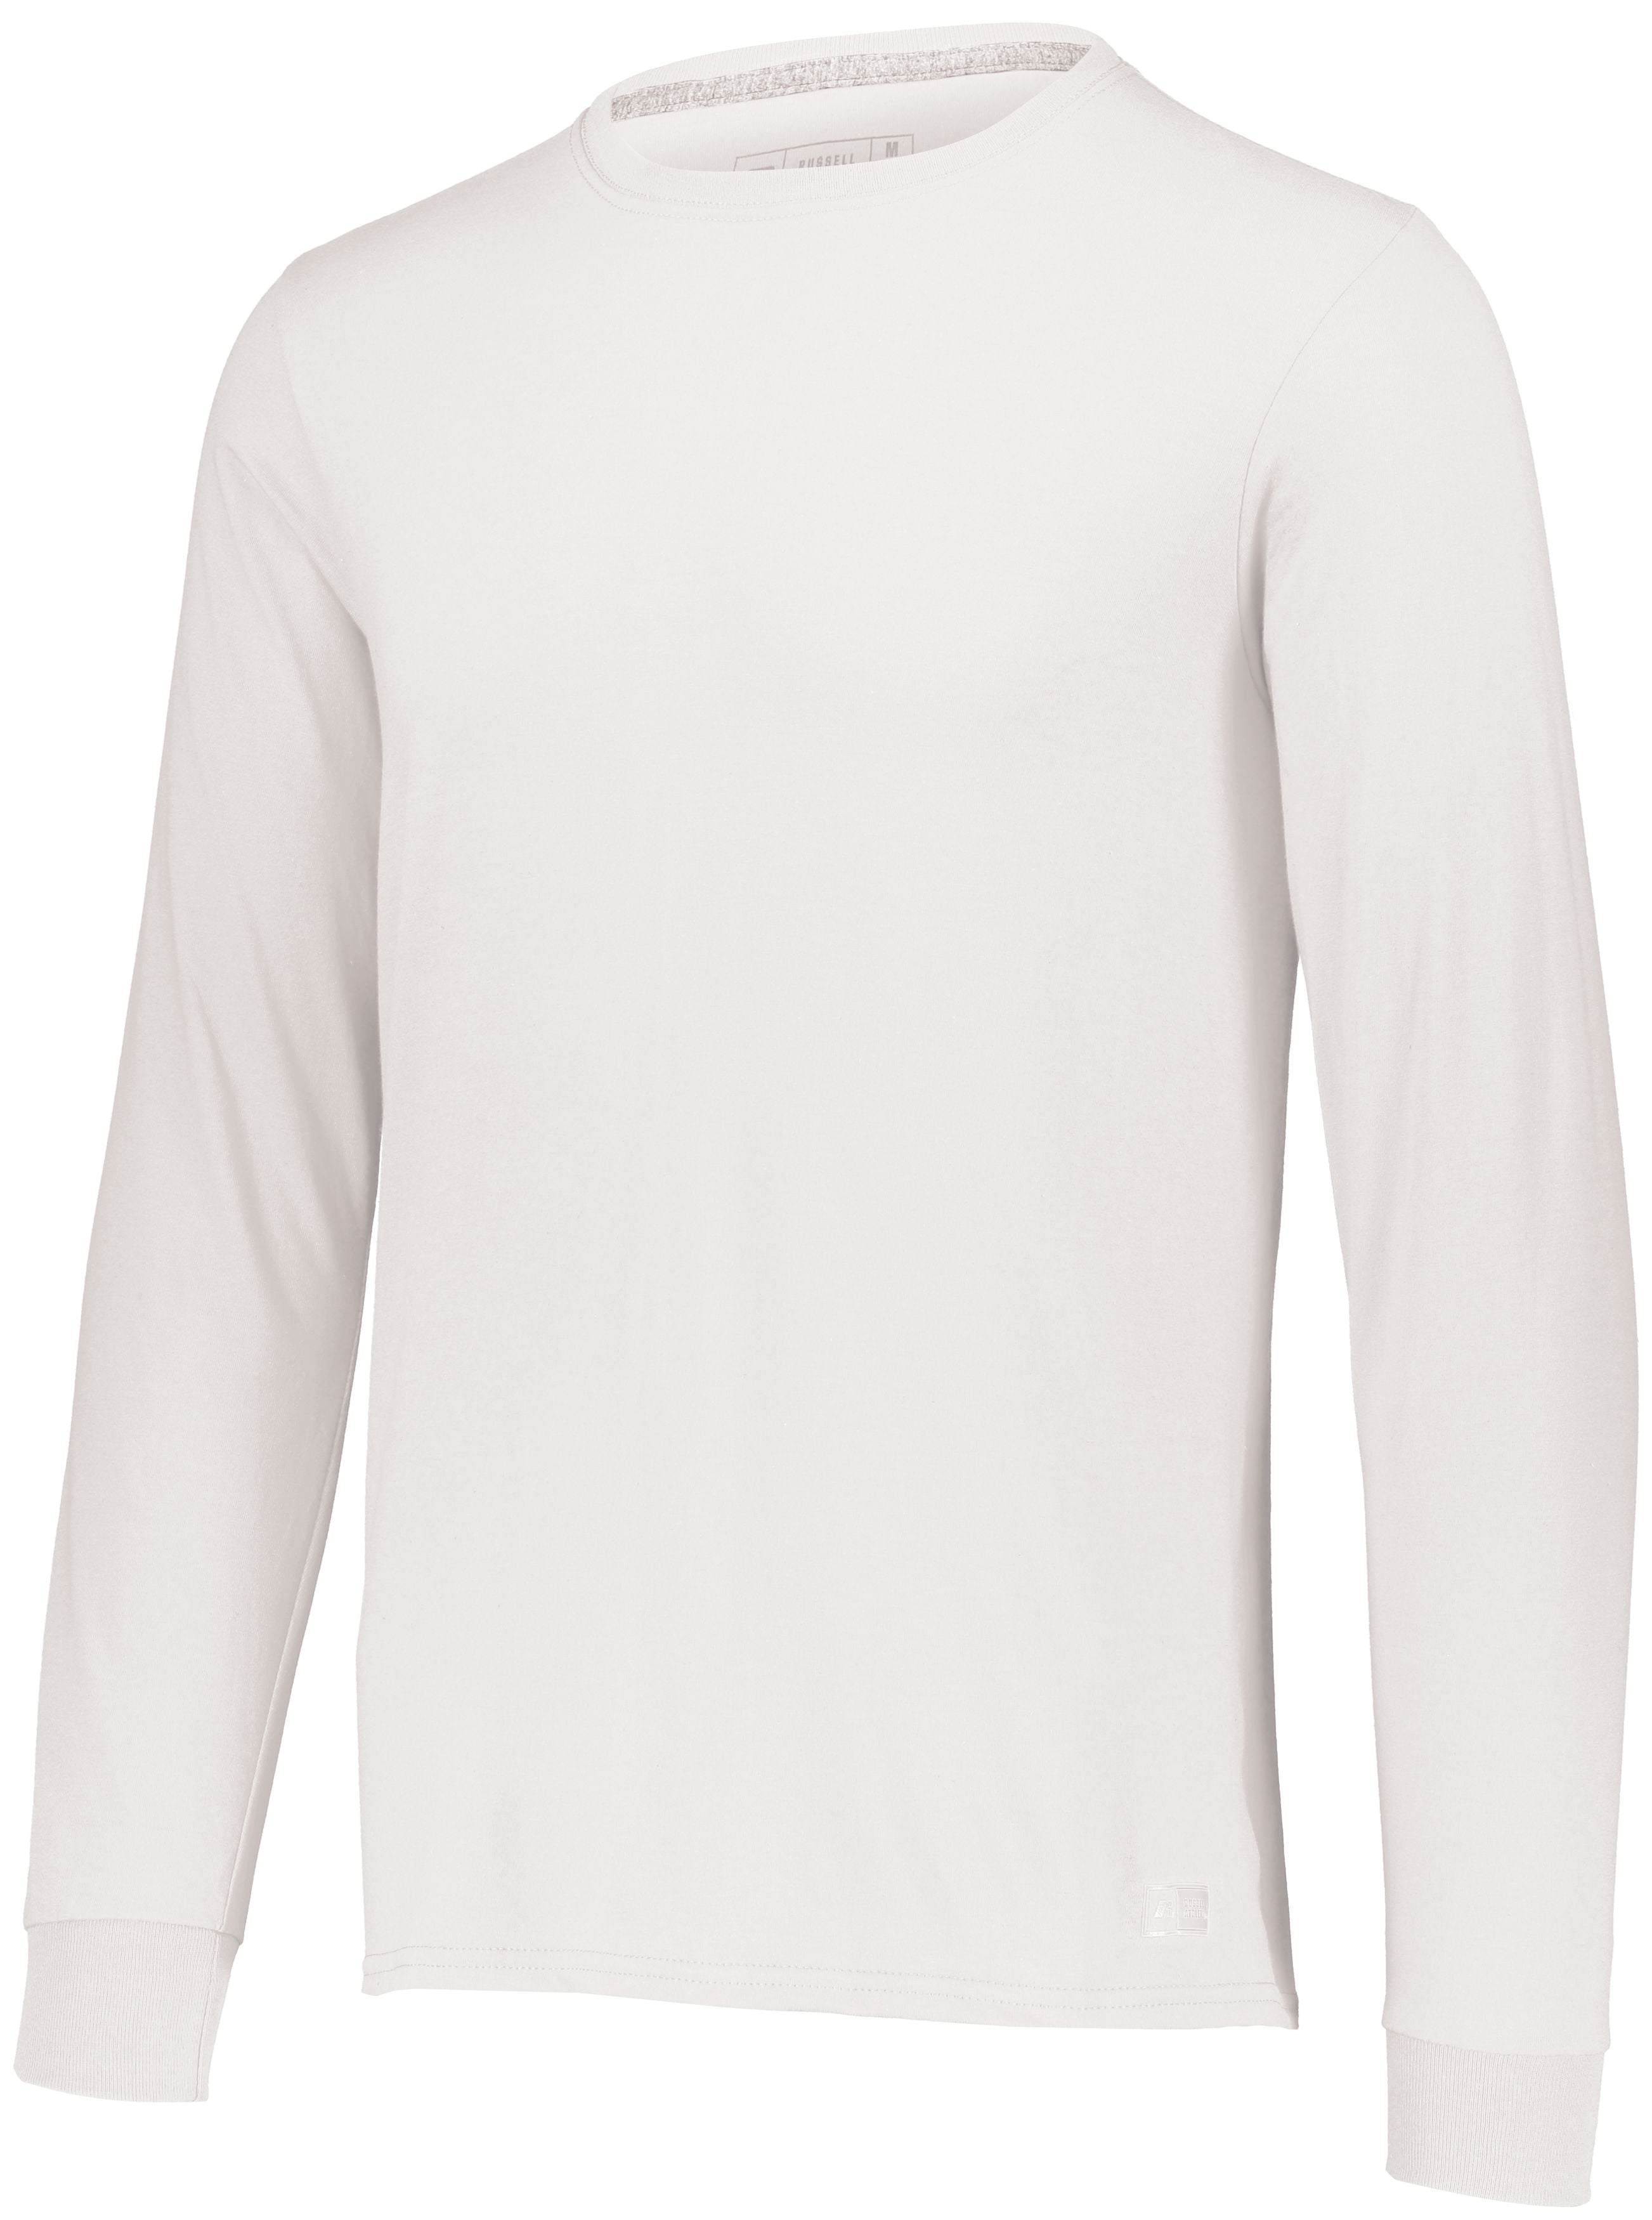 Russell Athletic Essential Long Sleeve Tee in White  -Part of the Adult, Adult-Tee-Shirt, T-Shirts, Russell-Athletic-Products, Shirts product lines at KanaleyCreations.com